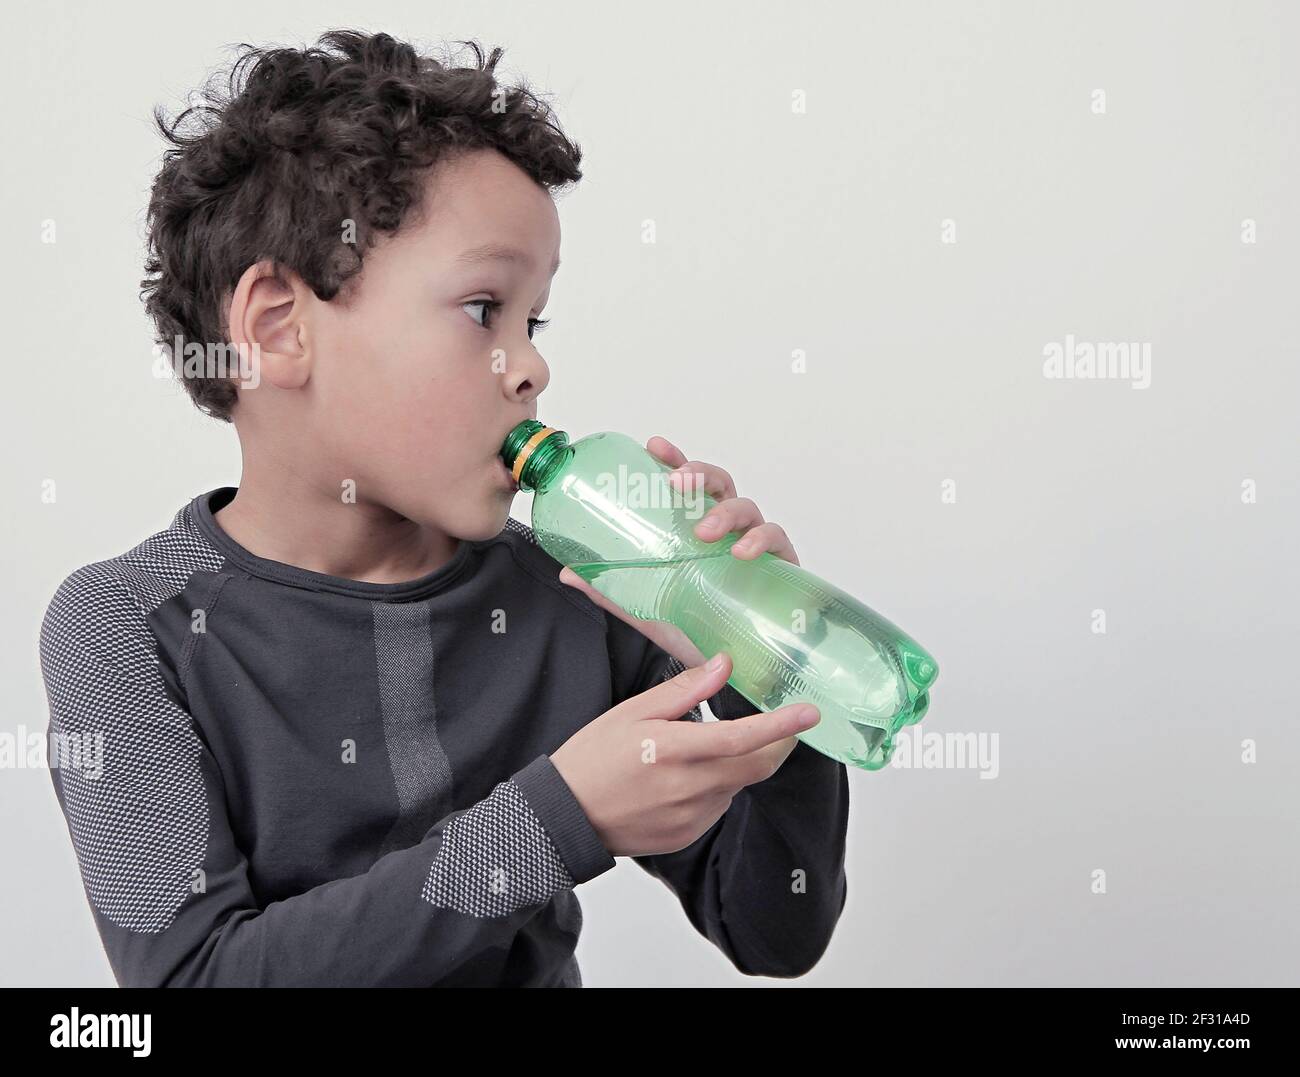 https://c8.alamy.com/comp/2F31A4D/boy-drinking-water-from-a-bottle-with-white-background-stock-photo-2F31A4D.jpg